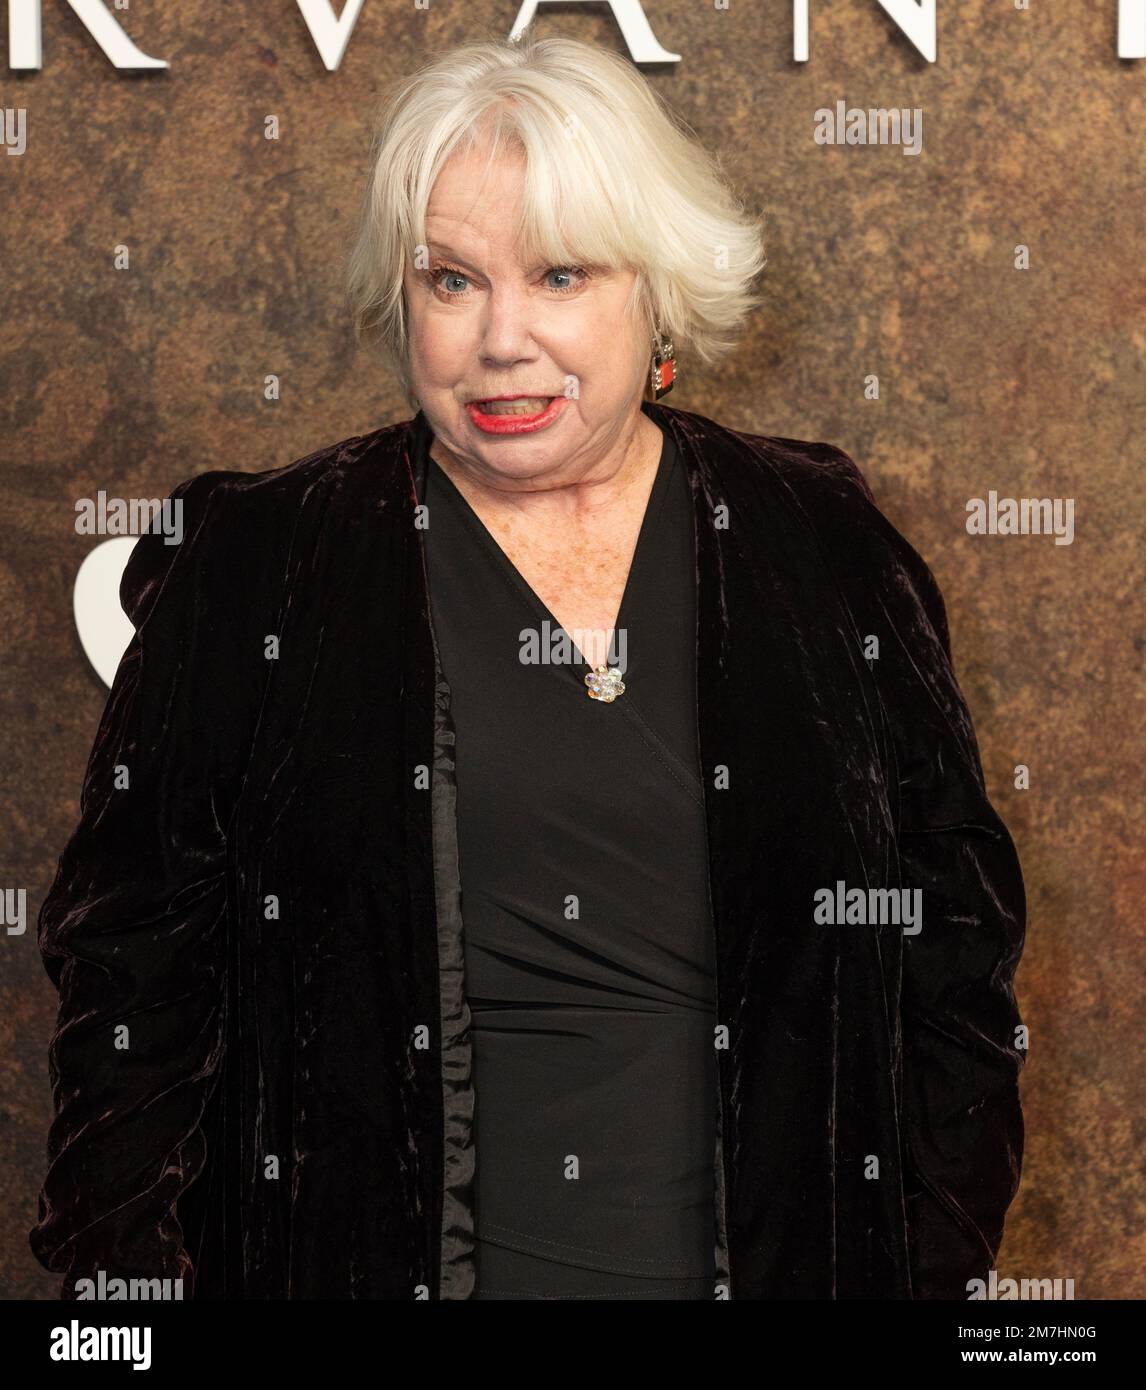 Denny Dillon attends Apple TV+'s "Servant" Season 4 New York Premiere at Walter Reade Theatre at Lincoln Center in New York on January 9, 2023 Stock Photo